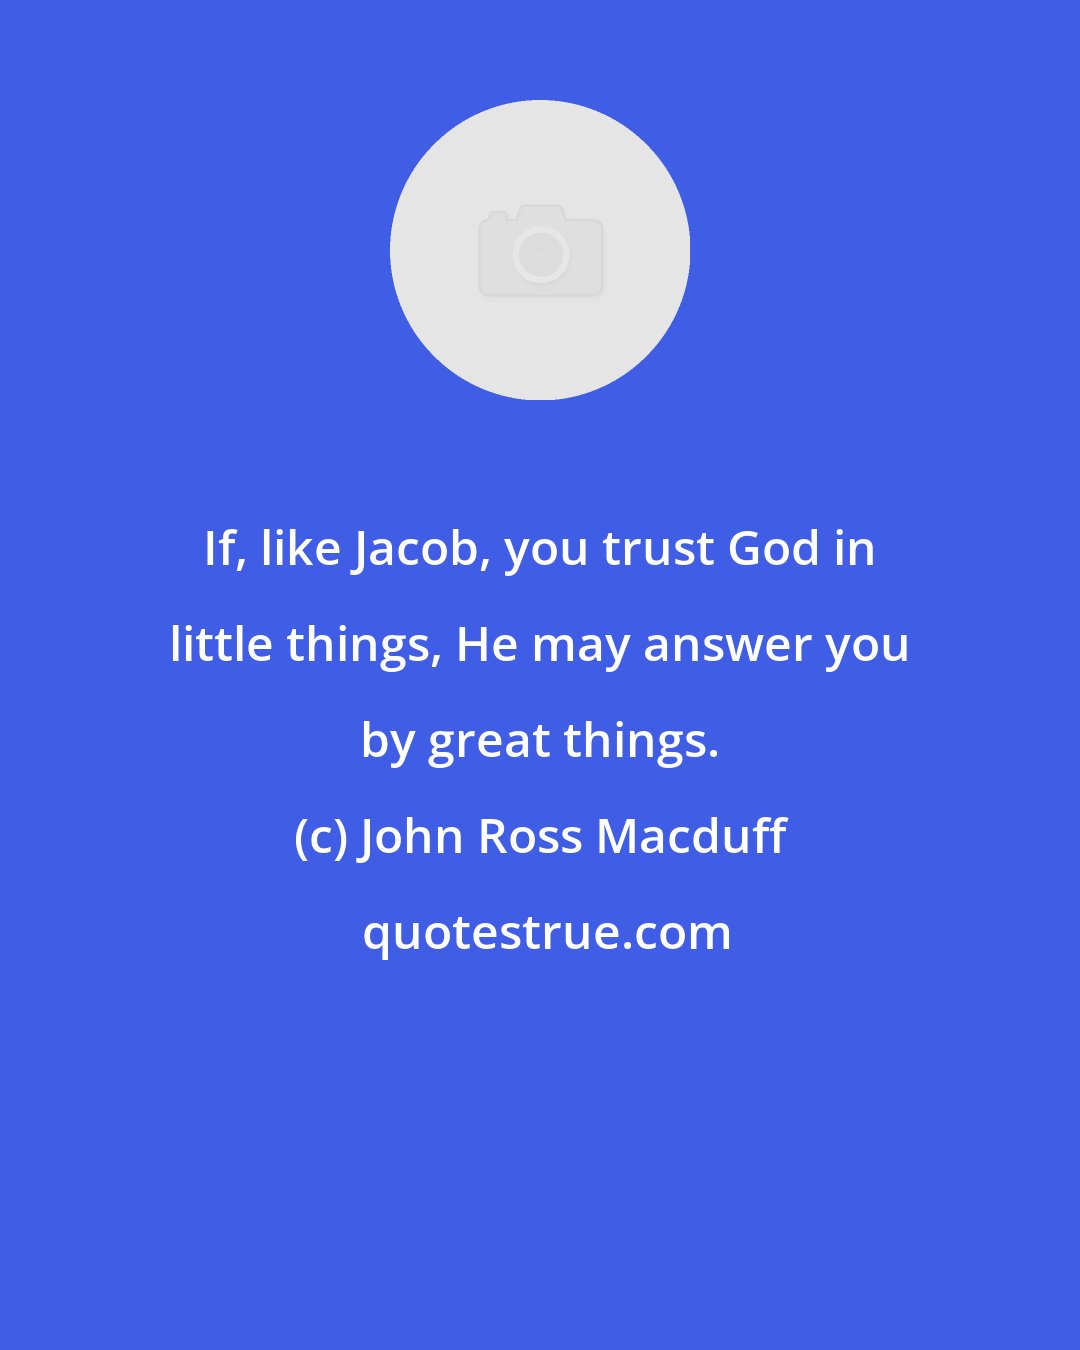 John Ross Macduff: If, like Jacob, you trust God in little things, He may answer you by great things.